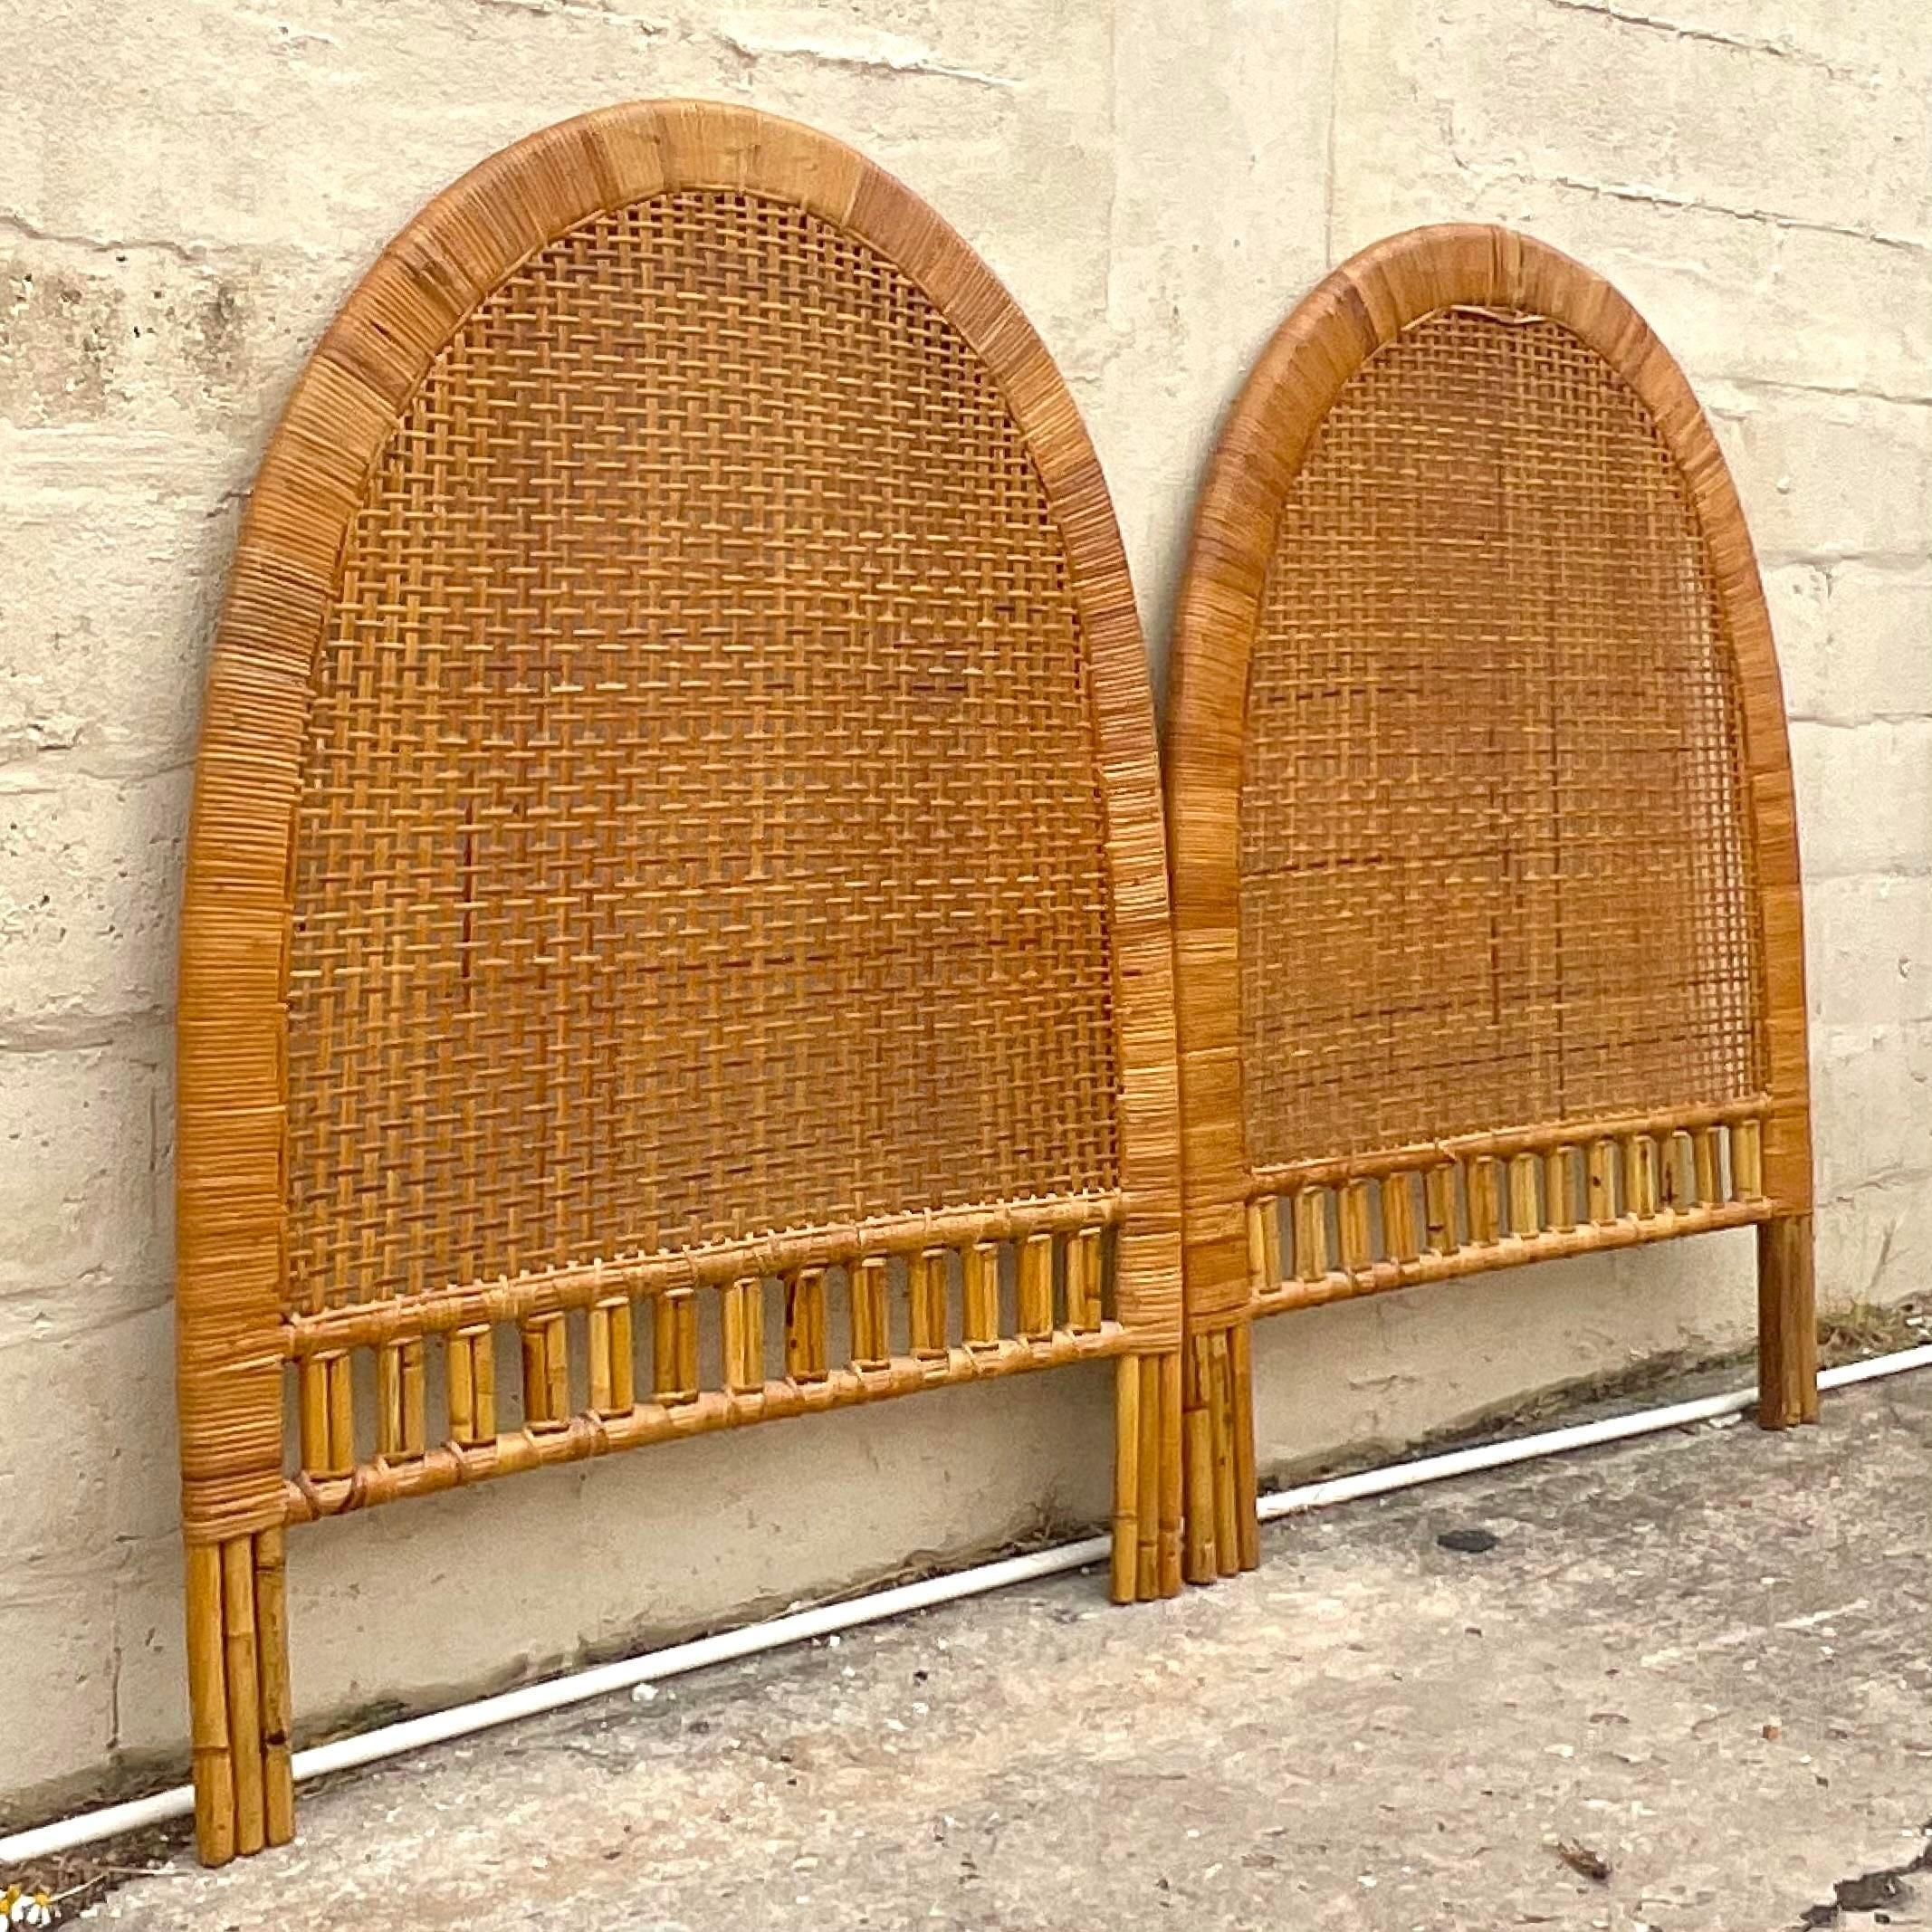 A fantastic pair of vintage coastal twin headboards. Beautiful woven rattan in a chic arched design. Acquired from a Palm Beach estate.